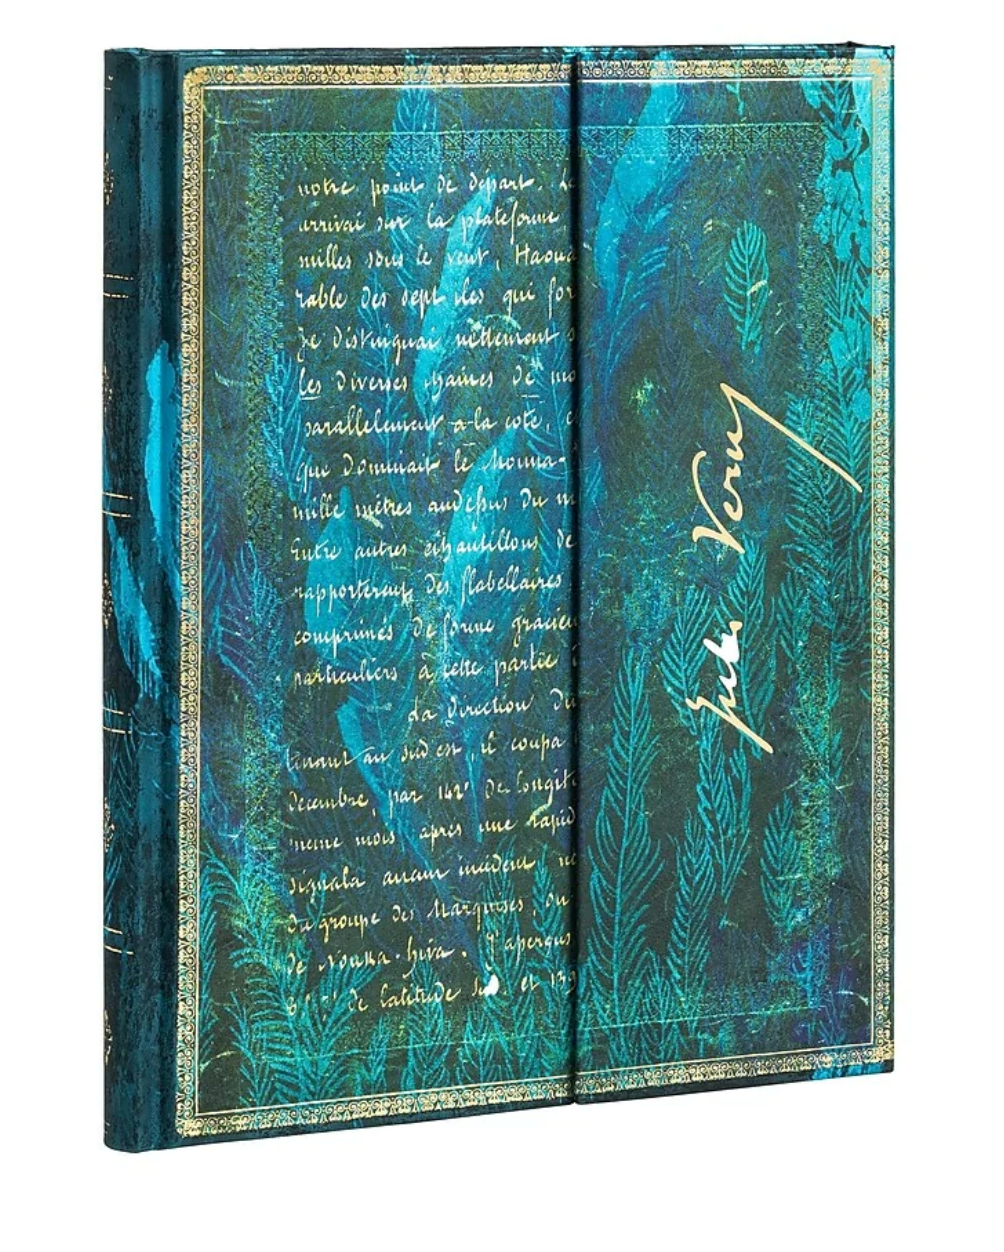 Jules Verne hardcover journal - 7" x 9" - 144 lined pages